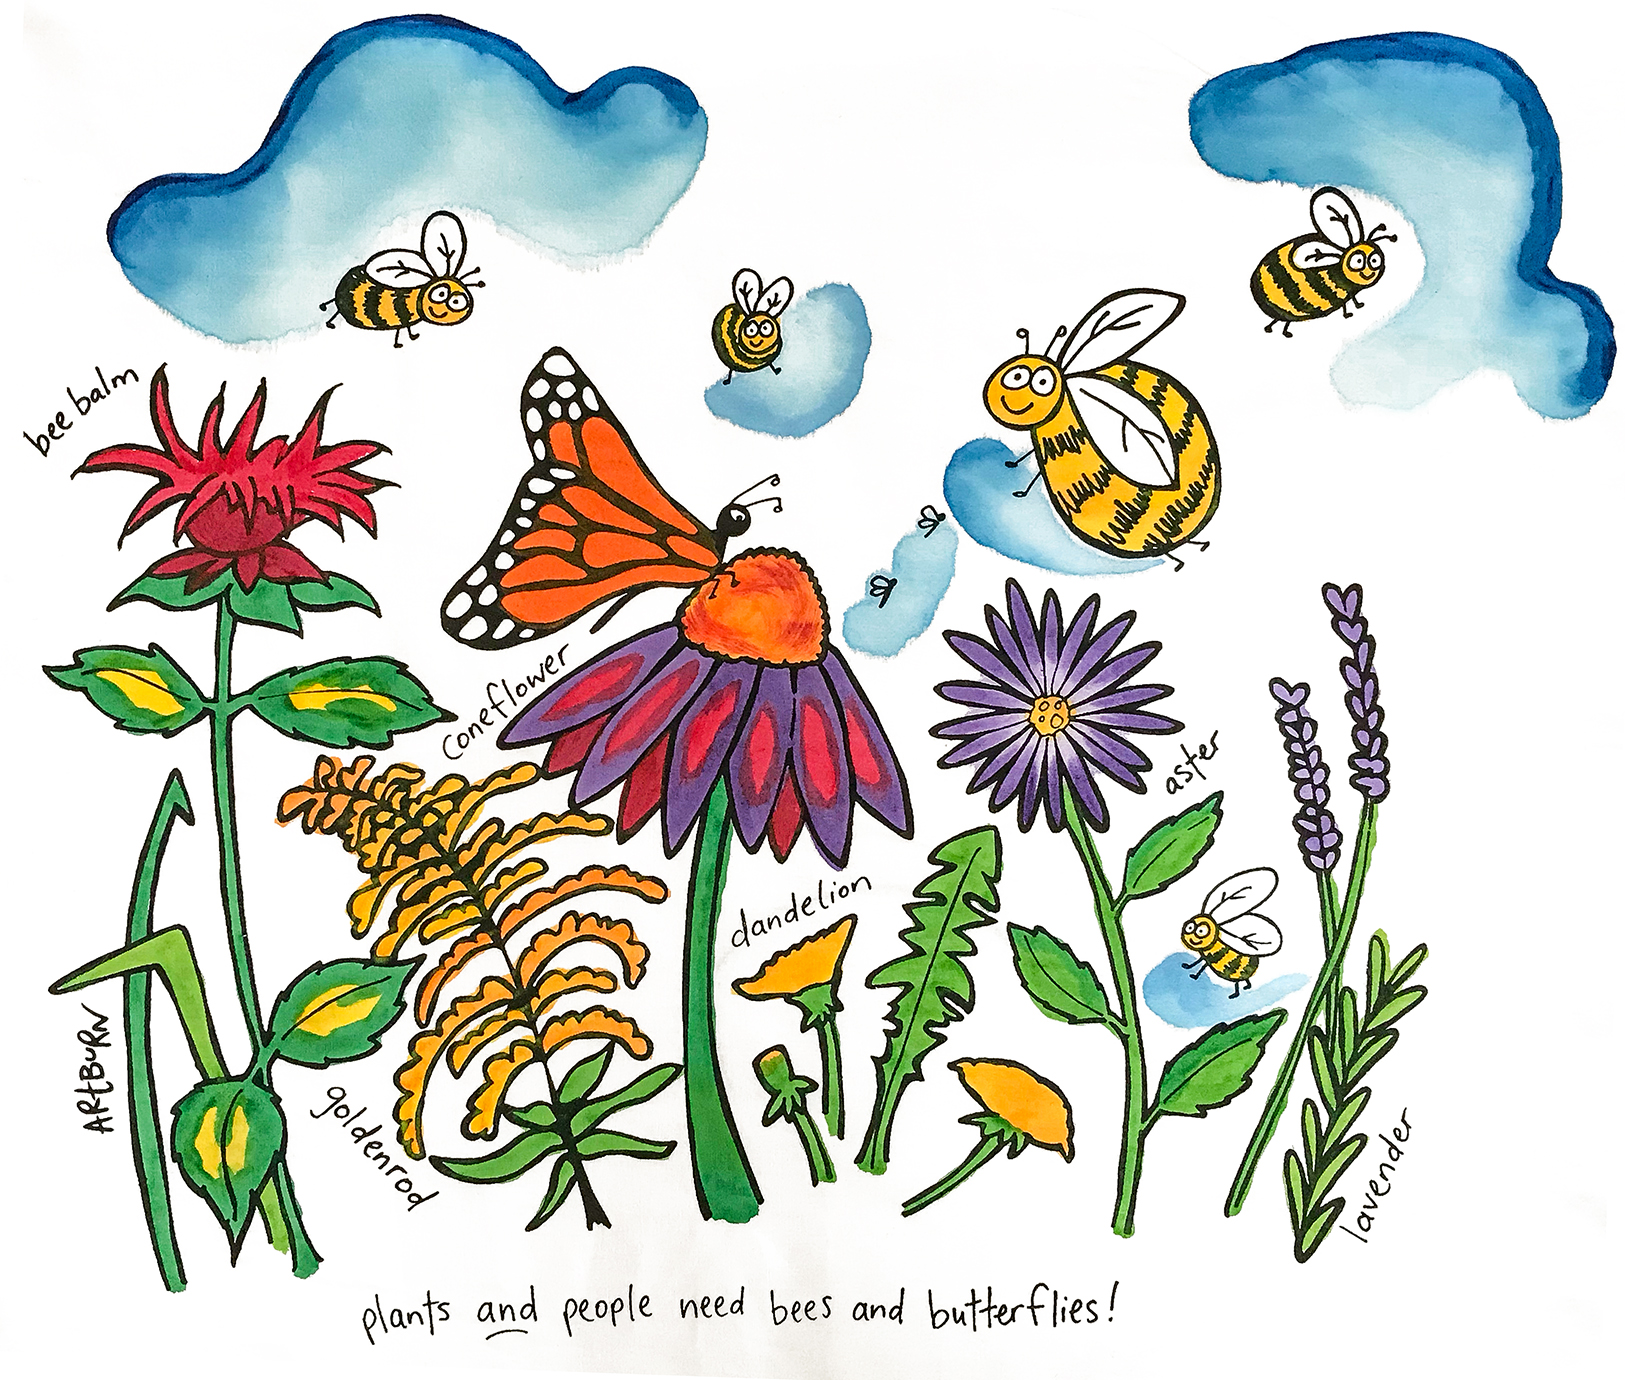 Painting Kits For Kids » NEW design for 2020 Plant a Pollinator Garden!